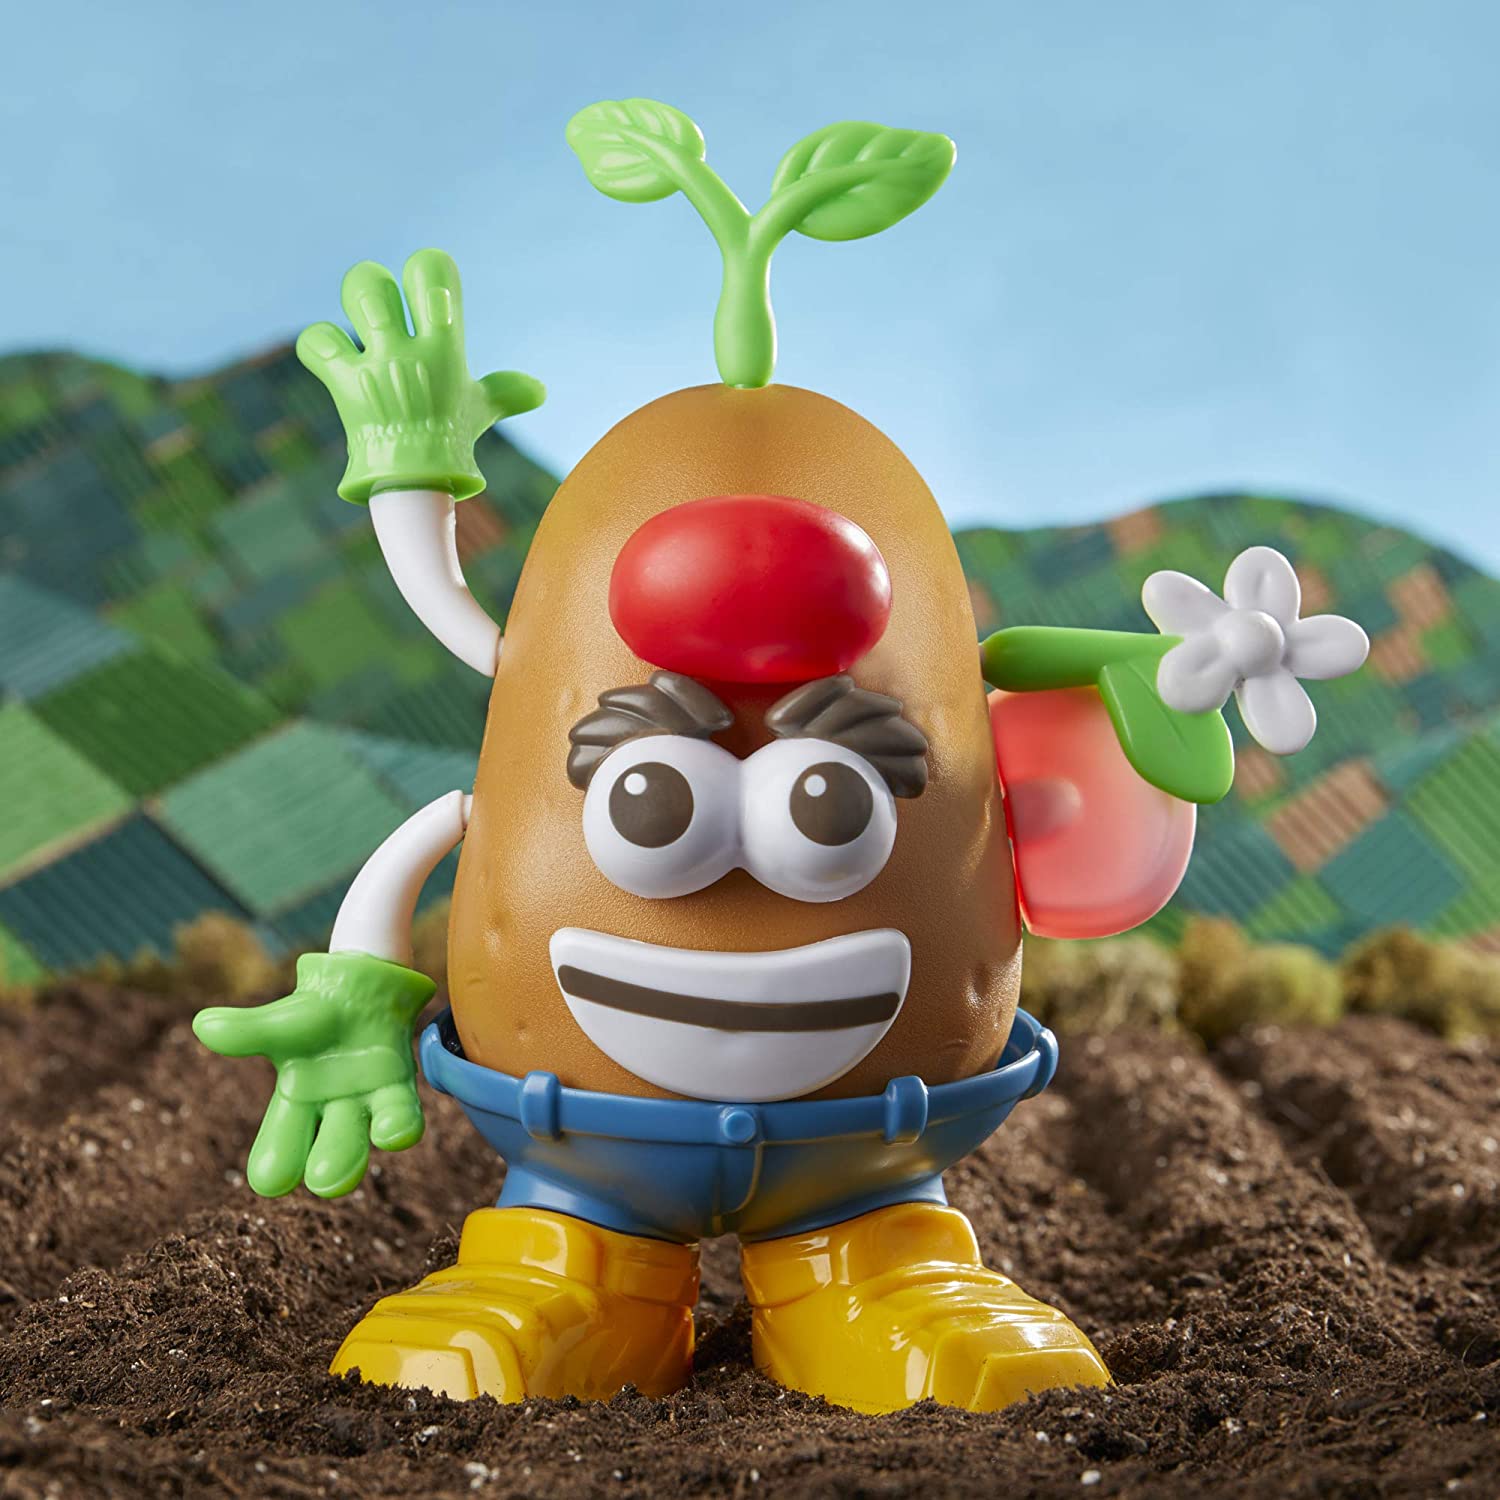 Mr Potato Head Goes Green Toy for Kids Ages 3 and up, Made with Plant-Based Plastic and FSC-Certified Paper Packaging - image 5 of 7